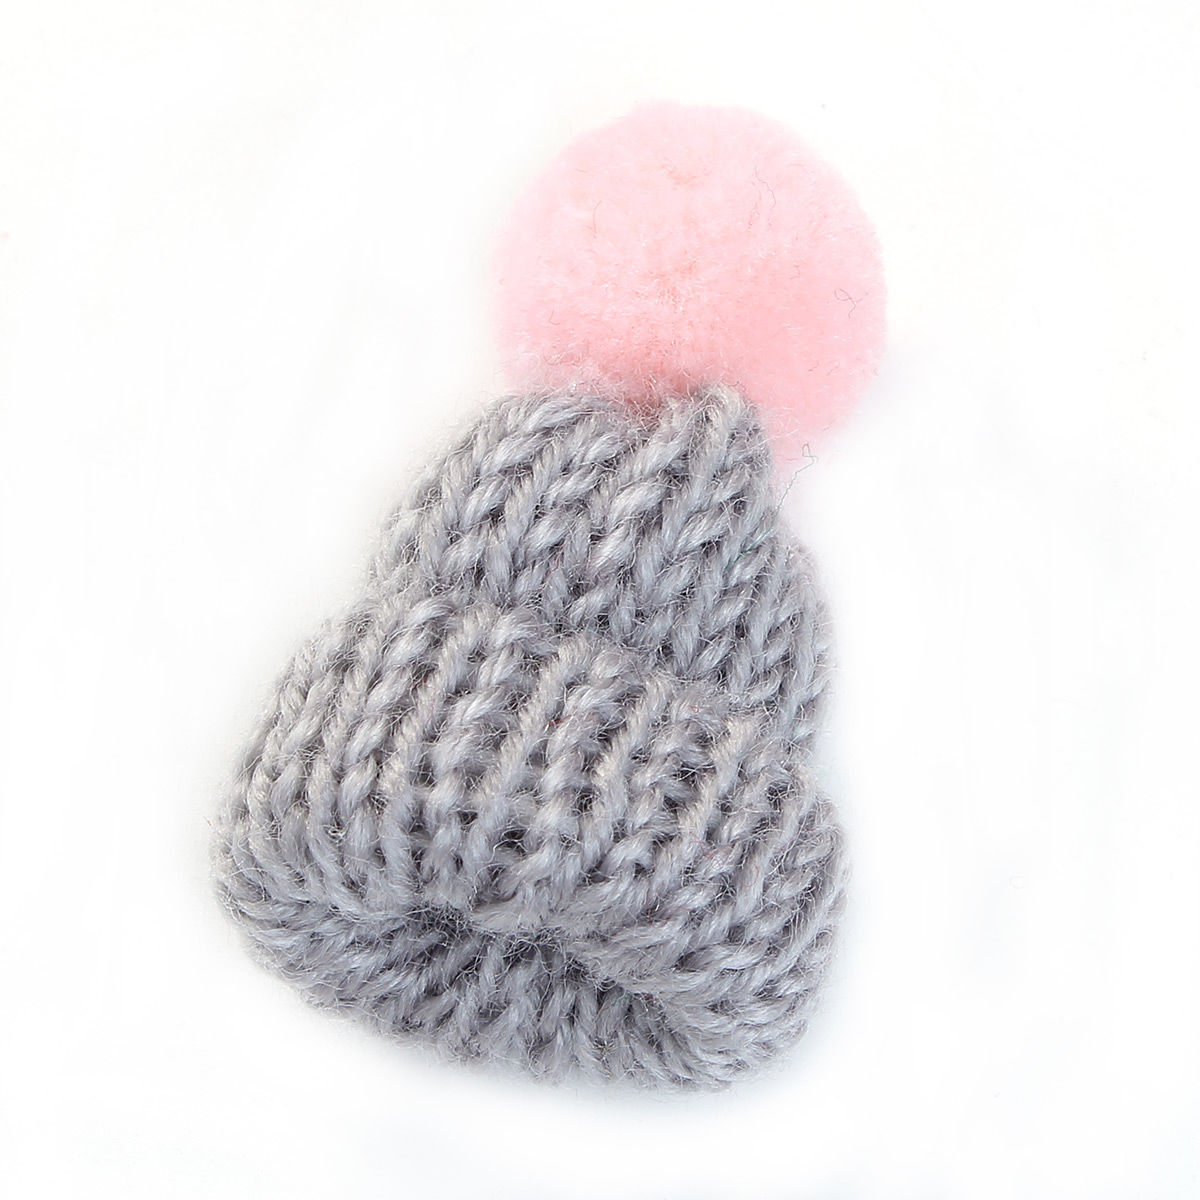 Picture of Wool Pin Brooches Knitted Hat Ginger W/ Coffee Pom Pom Ball 53mm(2 1/8") x 31mm(1 2/8"), 1 Piece